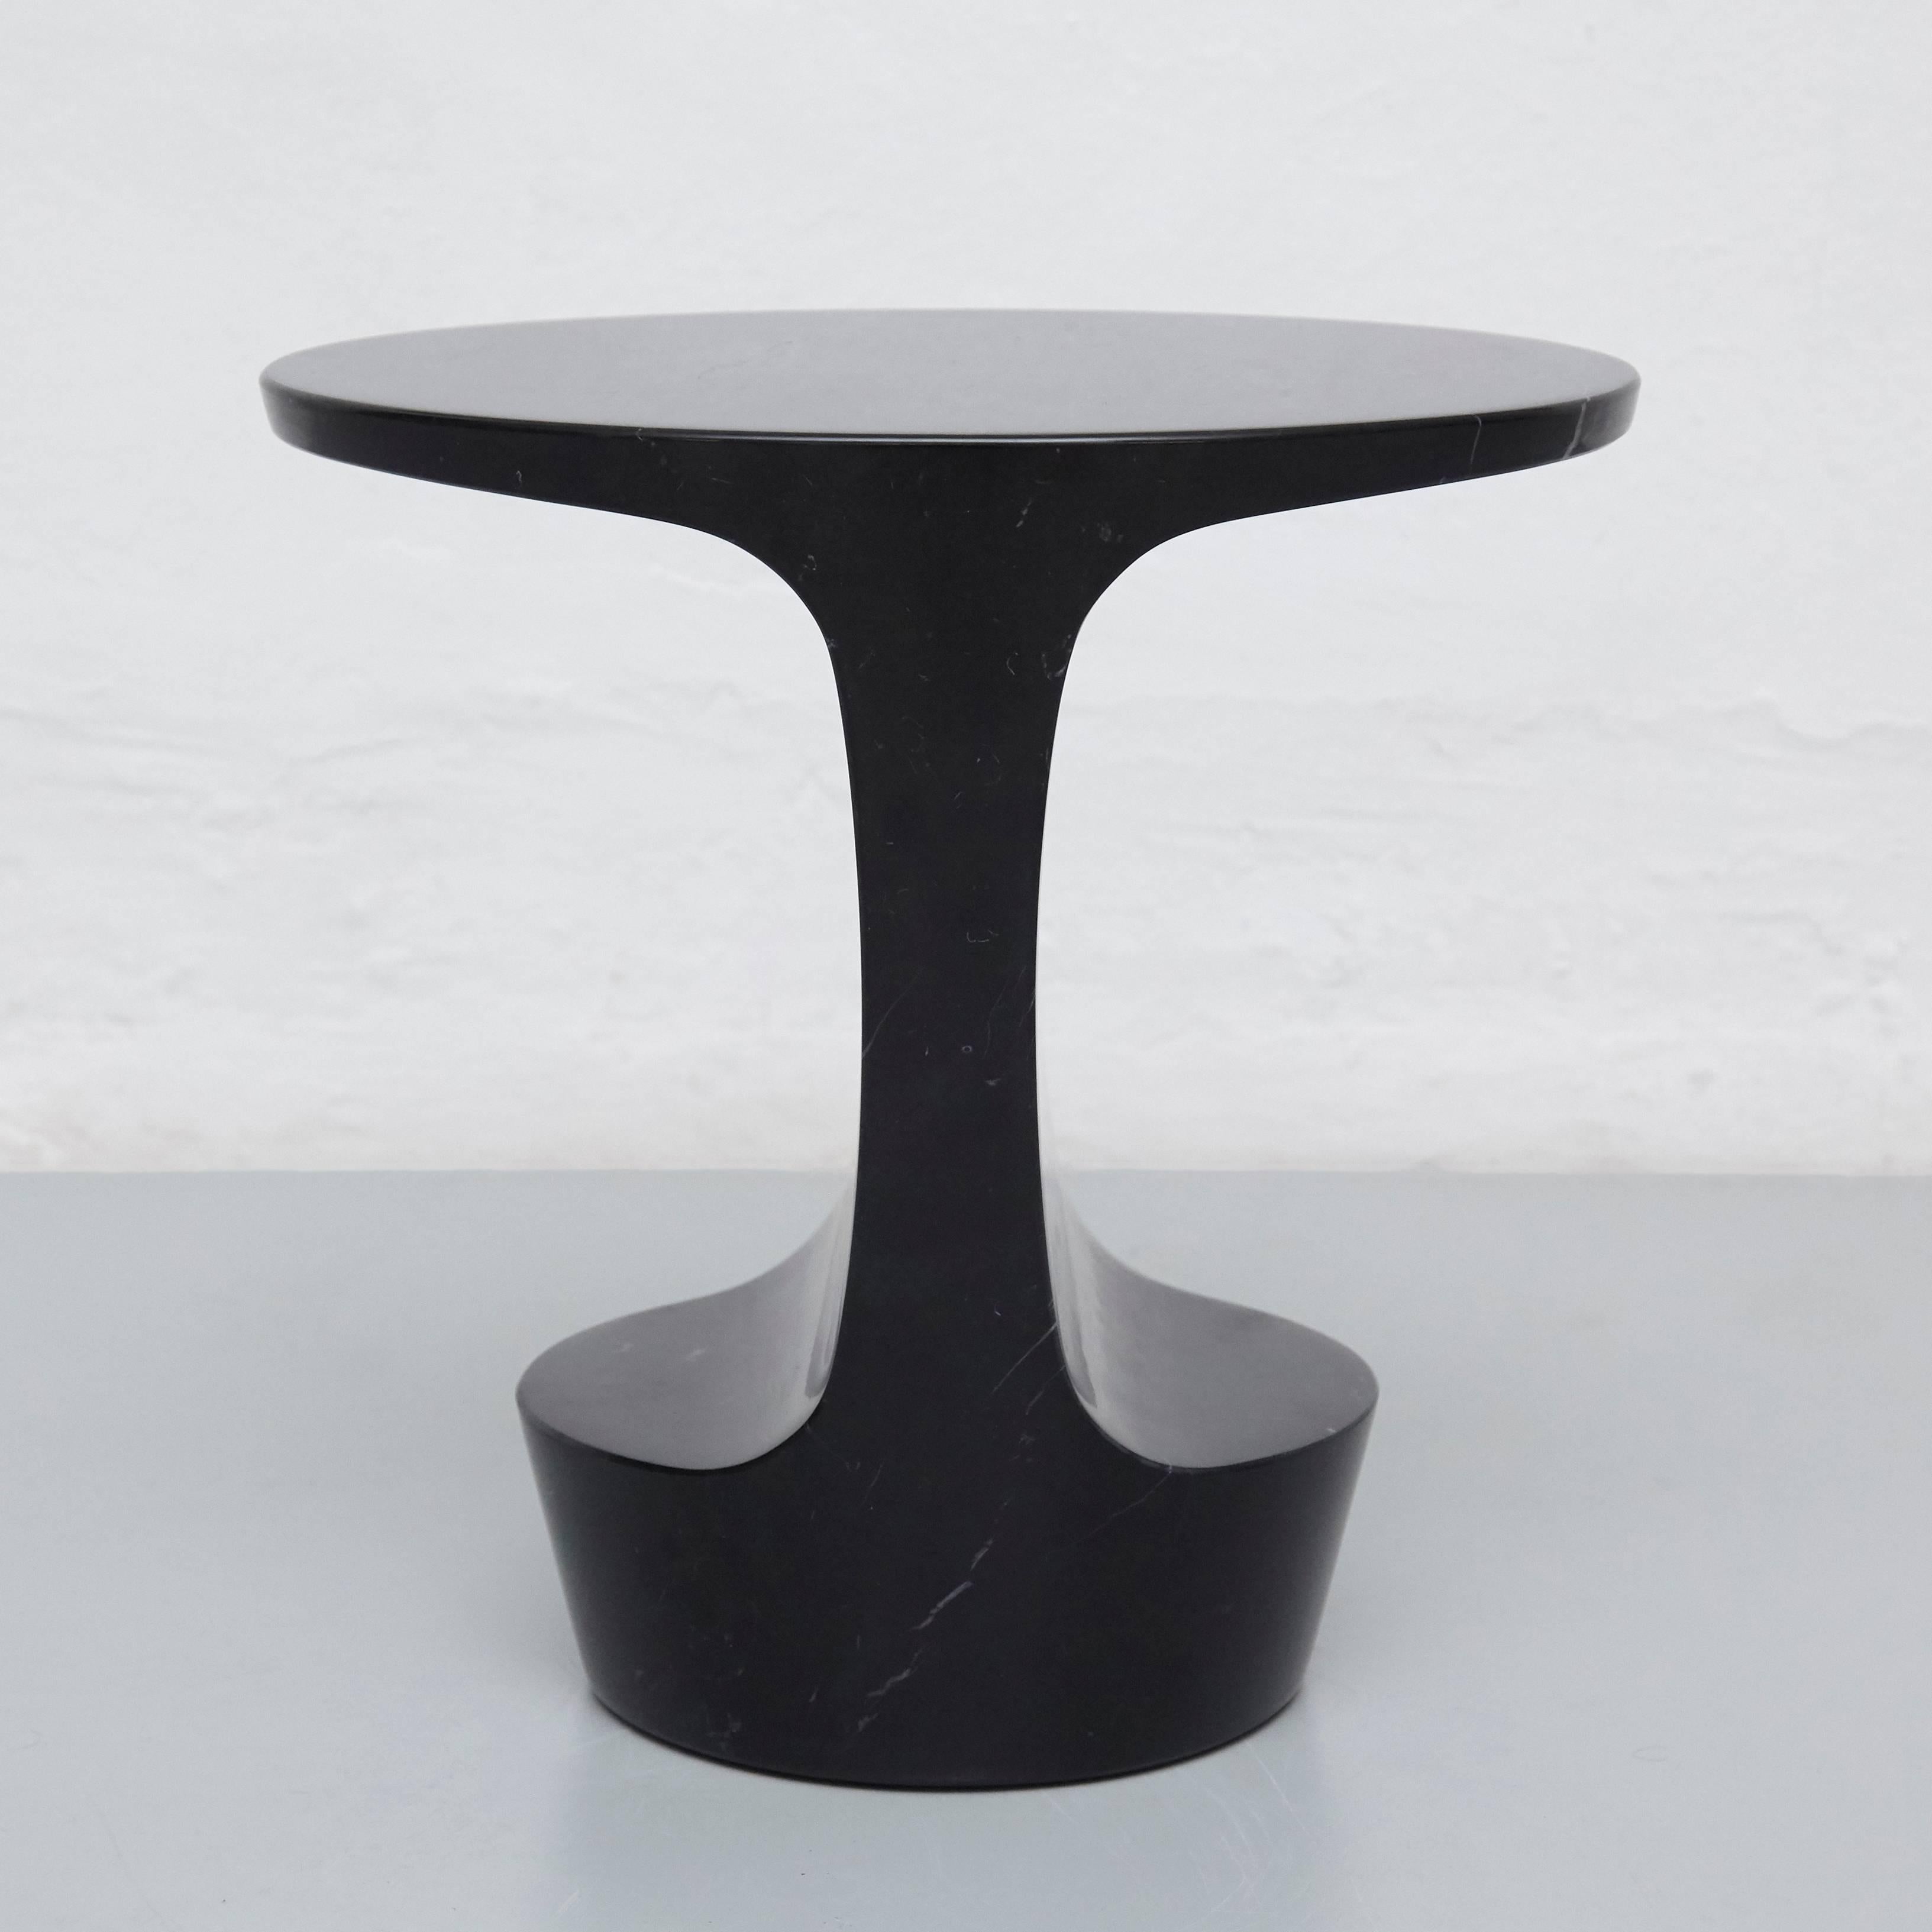 Side table designed by Adolfo Abejon.

Material:
Marquina marble or Carrara marble.

Finish:
Artisan polished.

Colors:
Marquina black or Carrara white.

Dimensions:
42 × 32 × 43 cm (L × W × H).

The Marble of the piece will be different for each